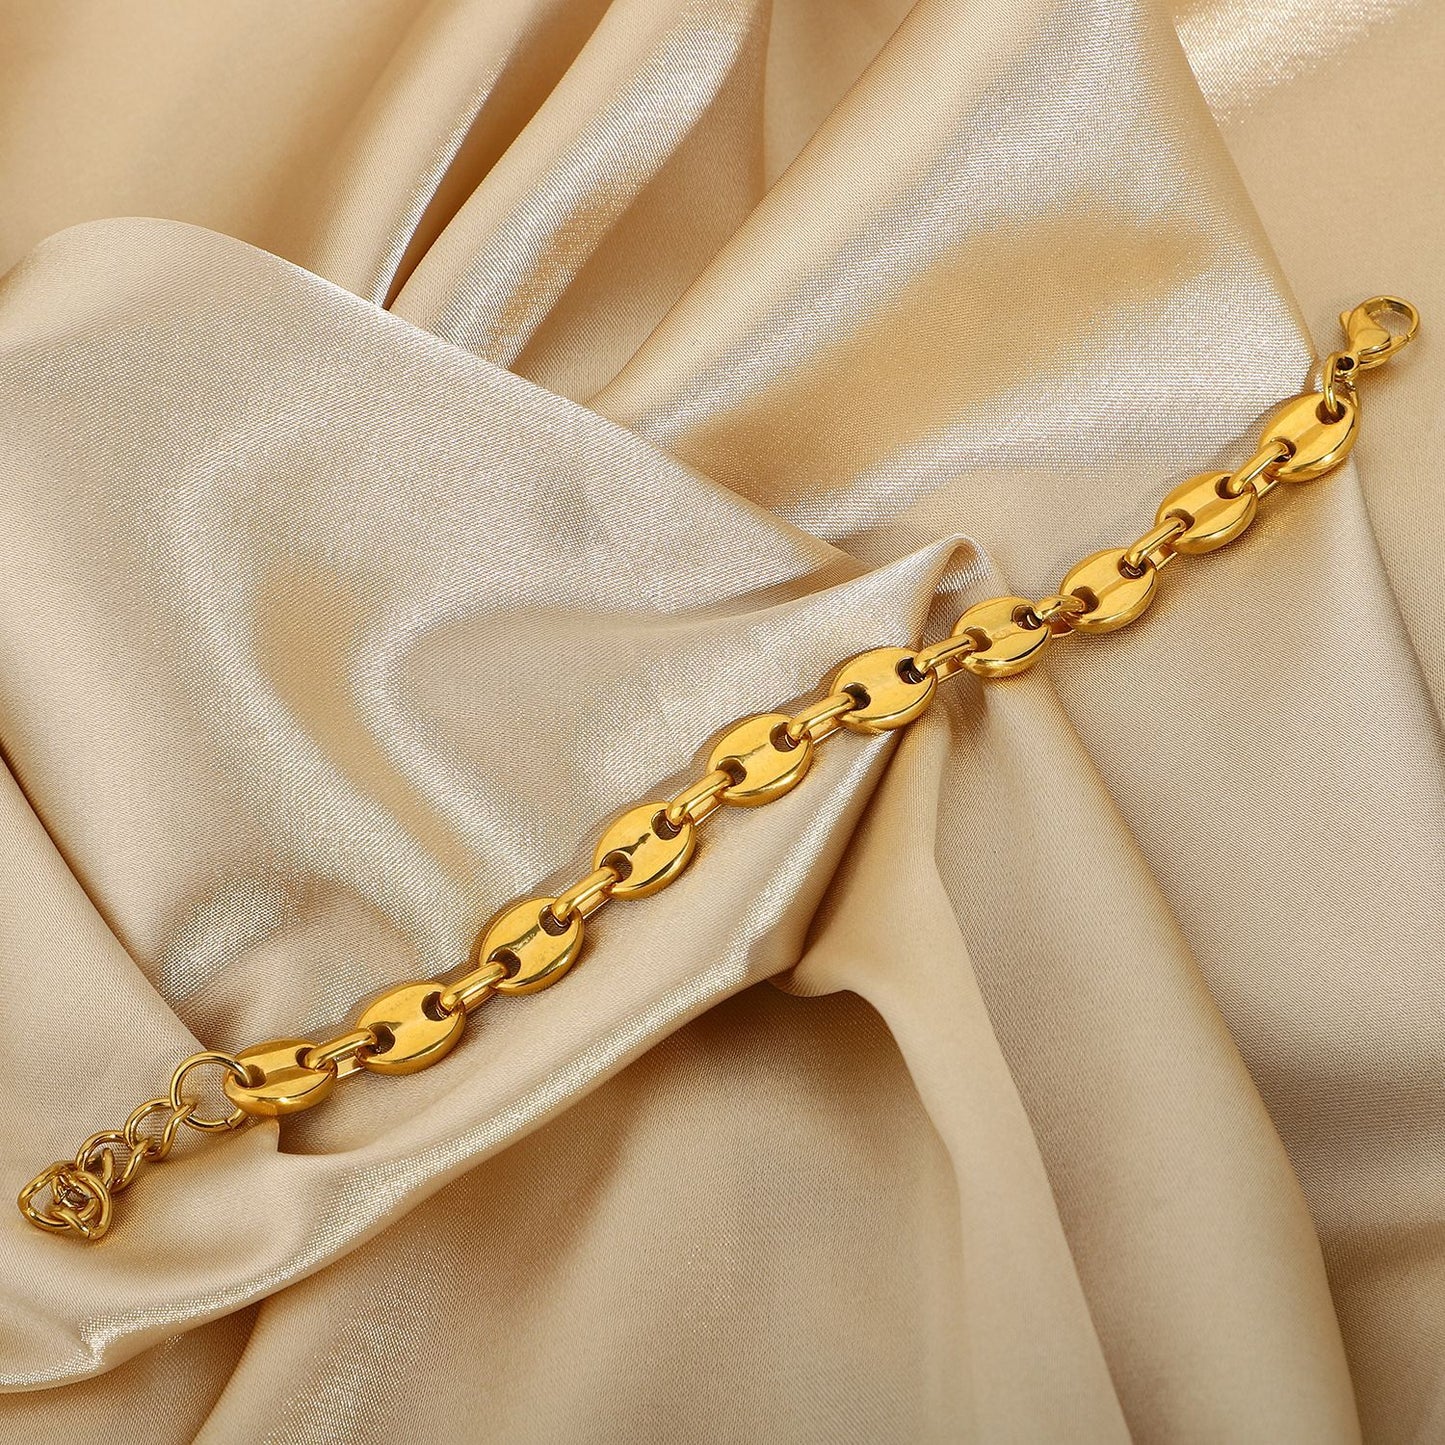 Gold Plated Coffee Bean Chain Bracelet